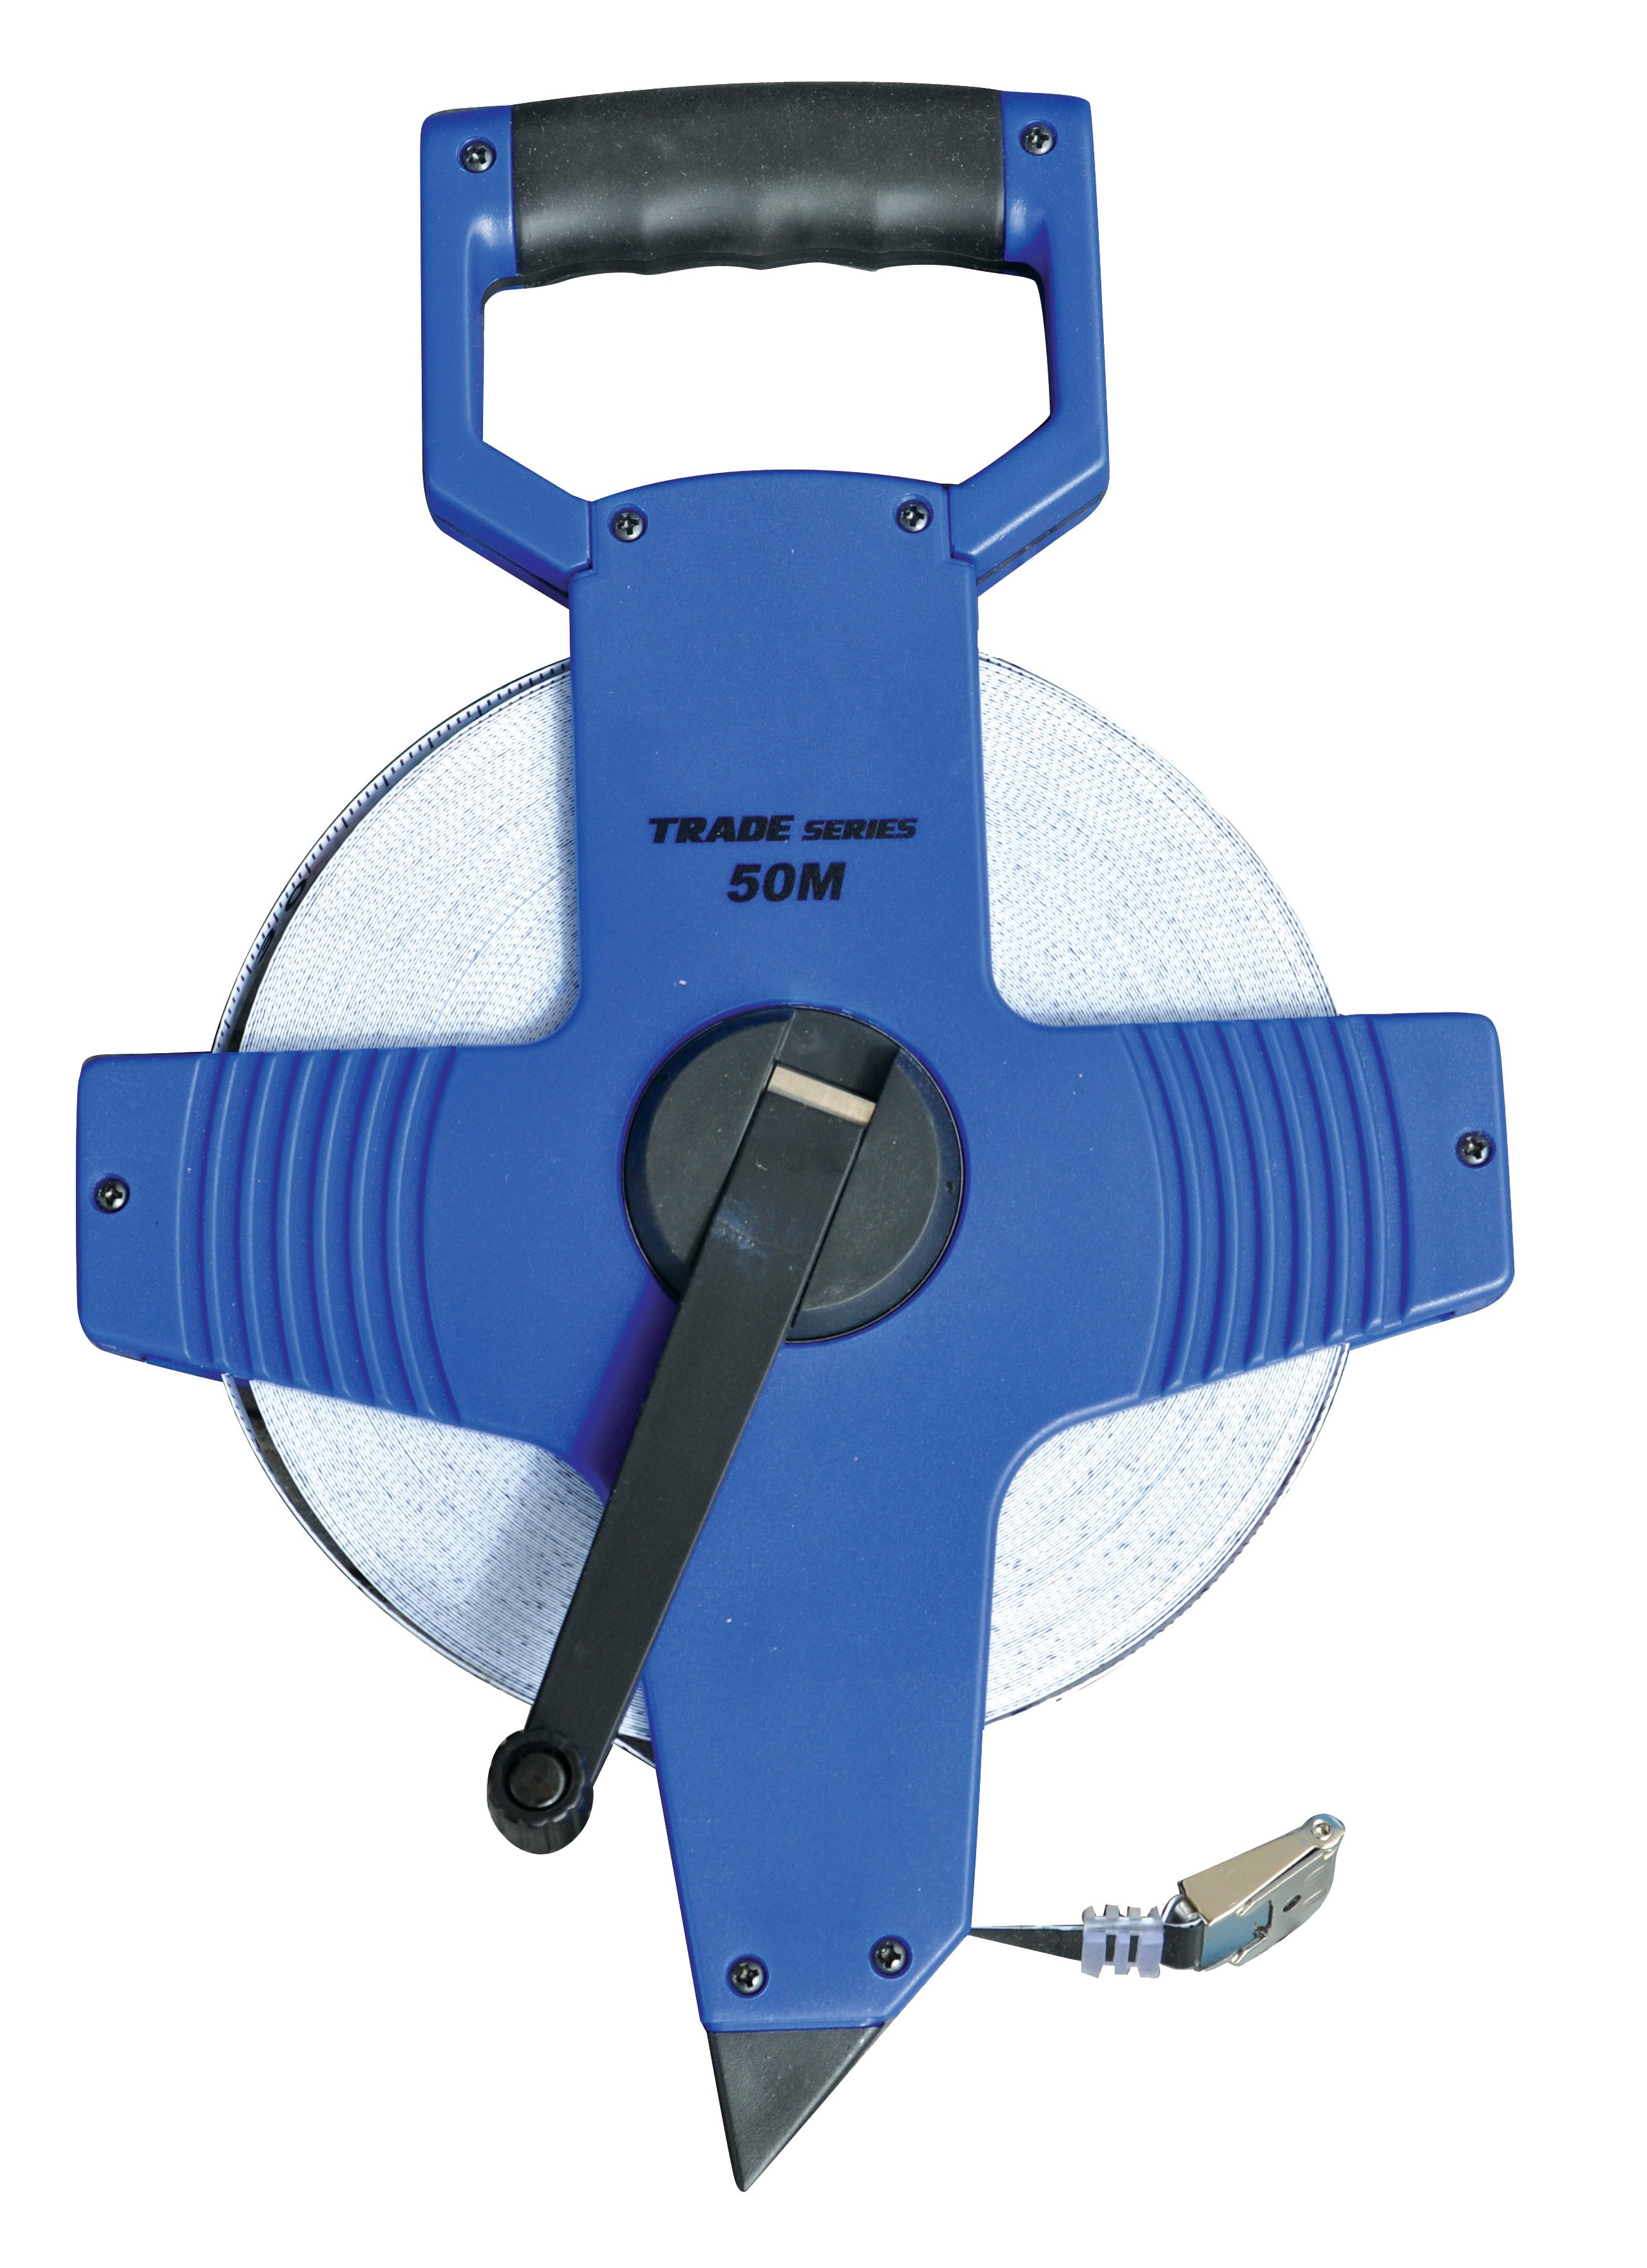 https://www.dynamicsgex.com.au/hubfs/images/New%20Products%20Images/MEASURING%20AND%20MARKING/OTAPE%20Open%20Reel%20Fibreglass%20Tape%20-%2050m.jpg